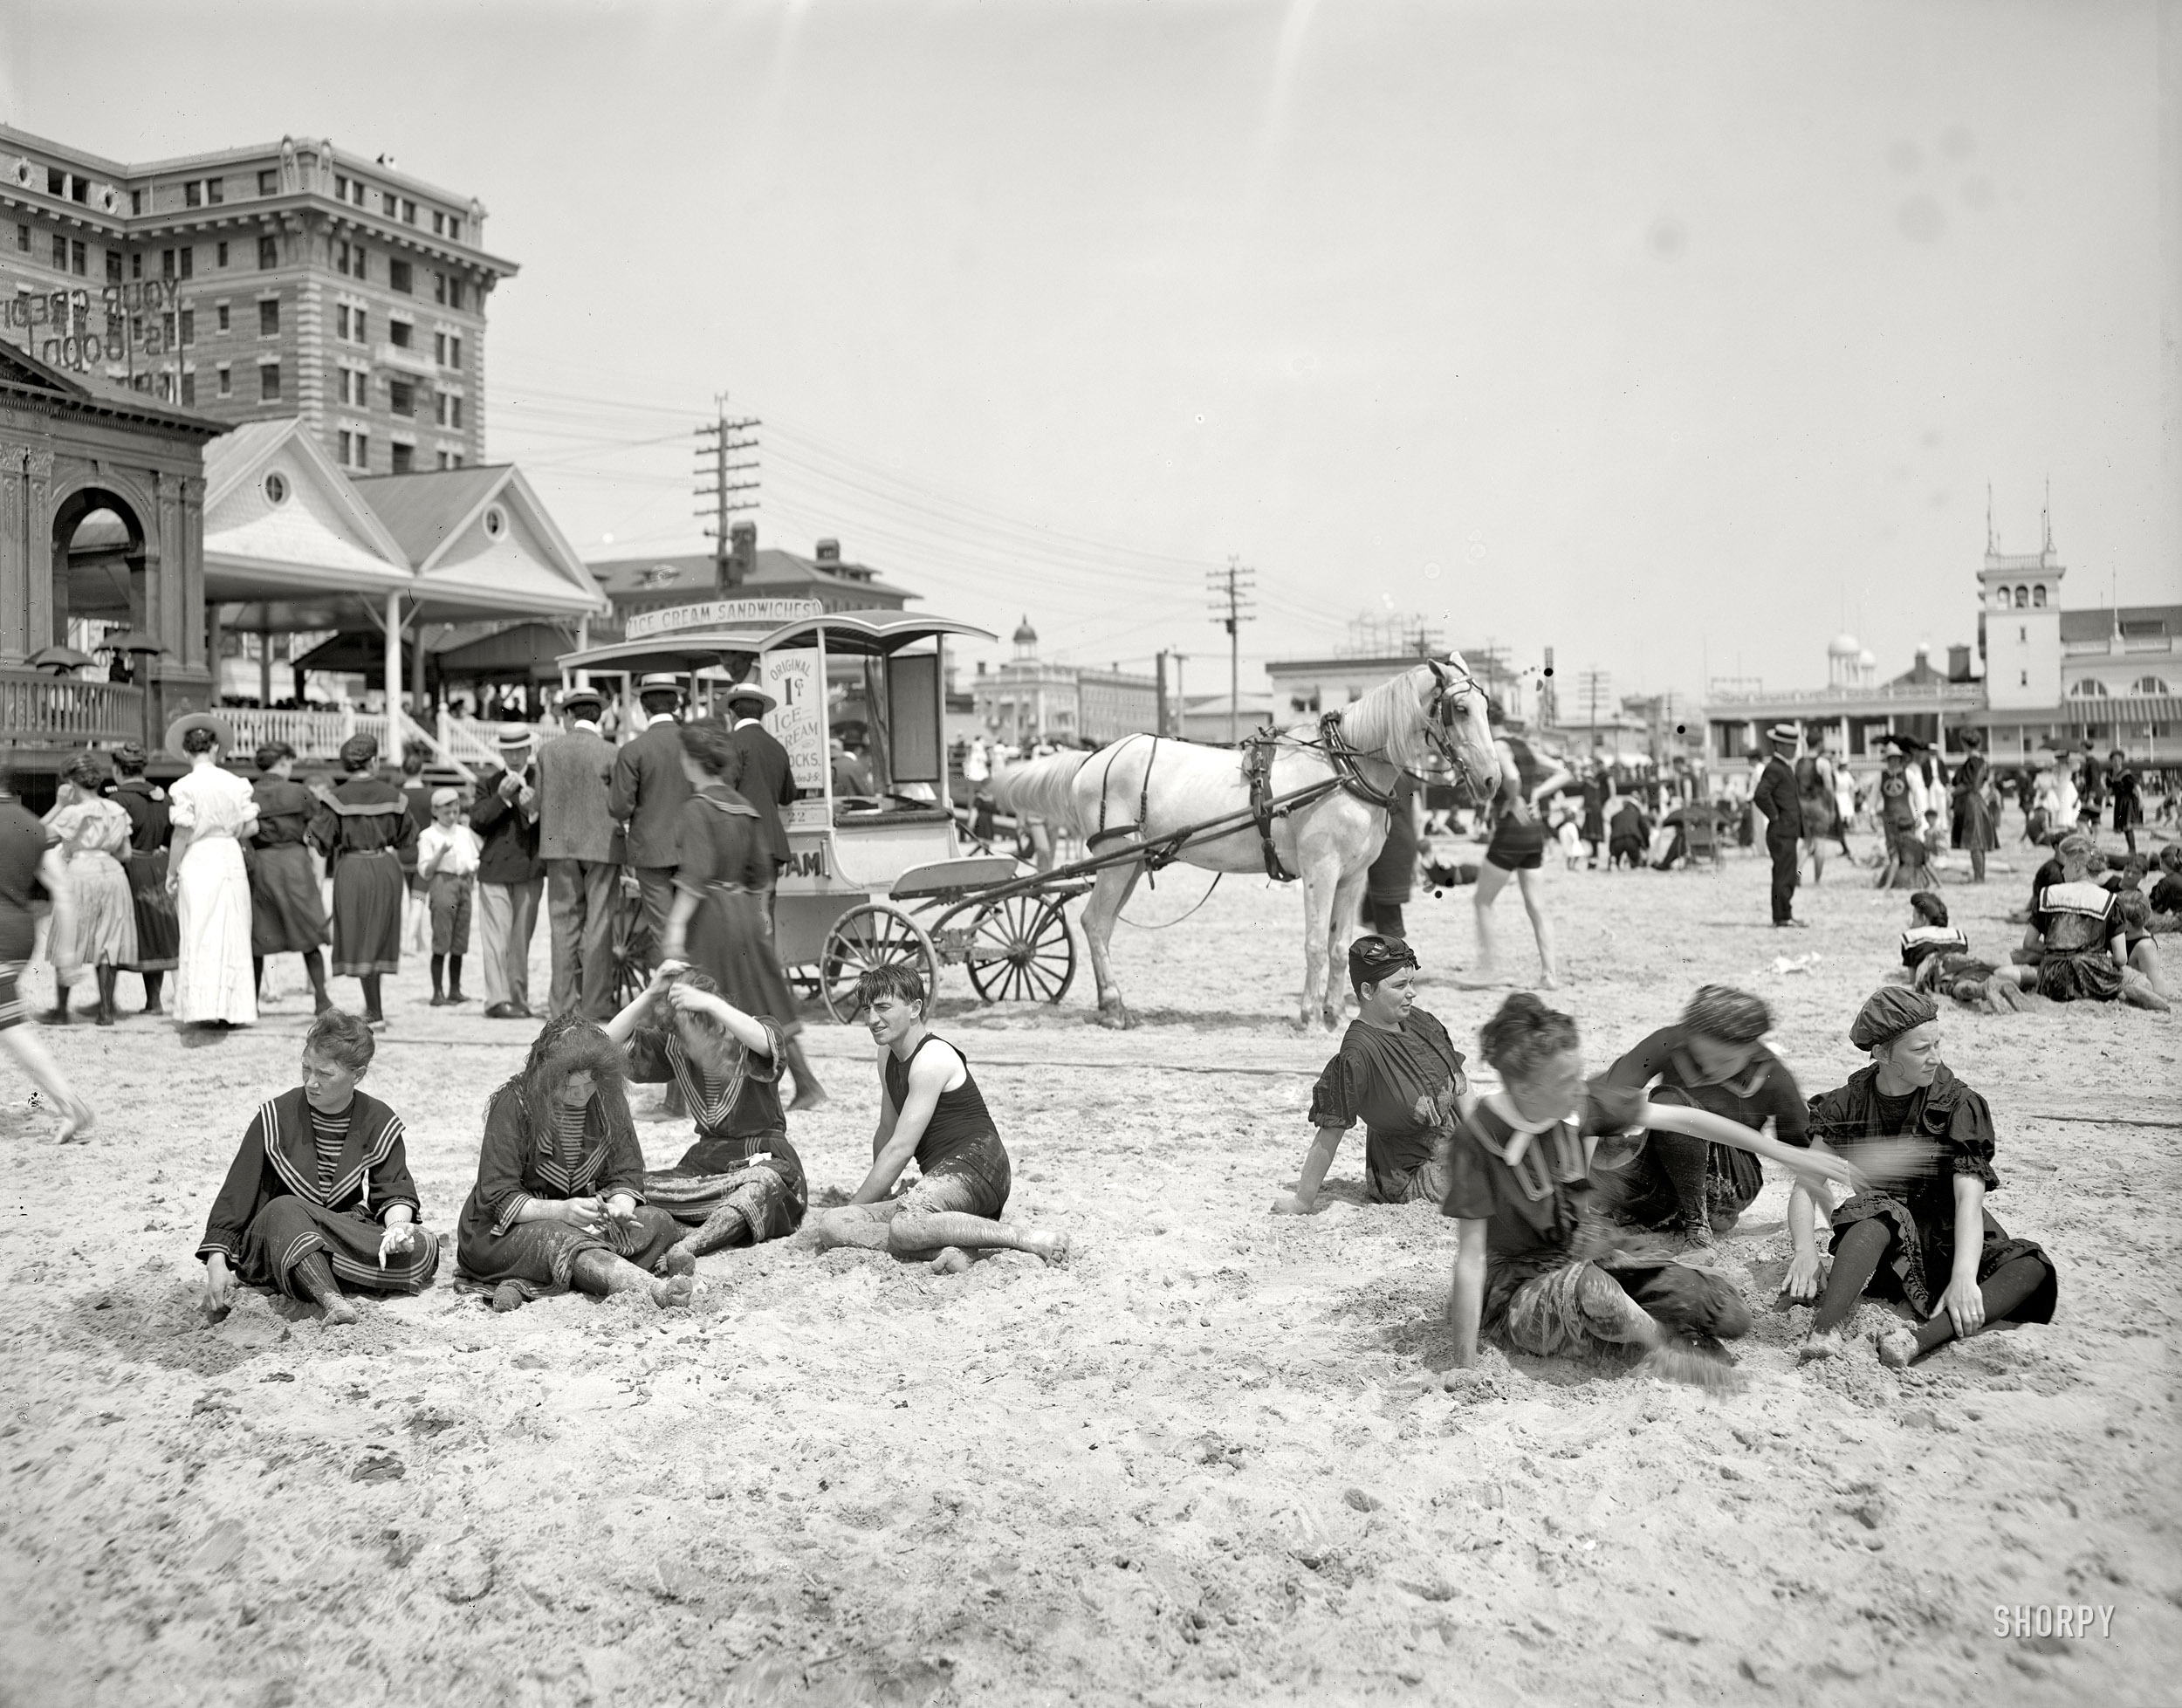 The Jersey Shore circa 1905. "On the beach, Atlantic City." Who has the Frisbee? 8x10 inch dry plate glass negative, Detroit Publishing Company. View full size.